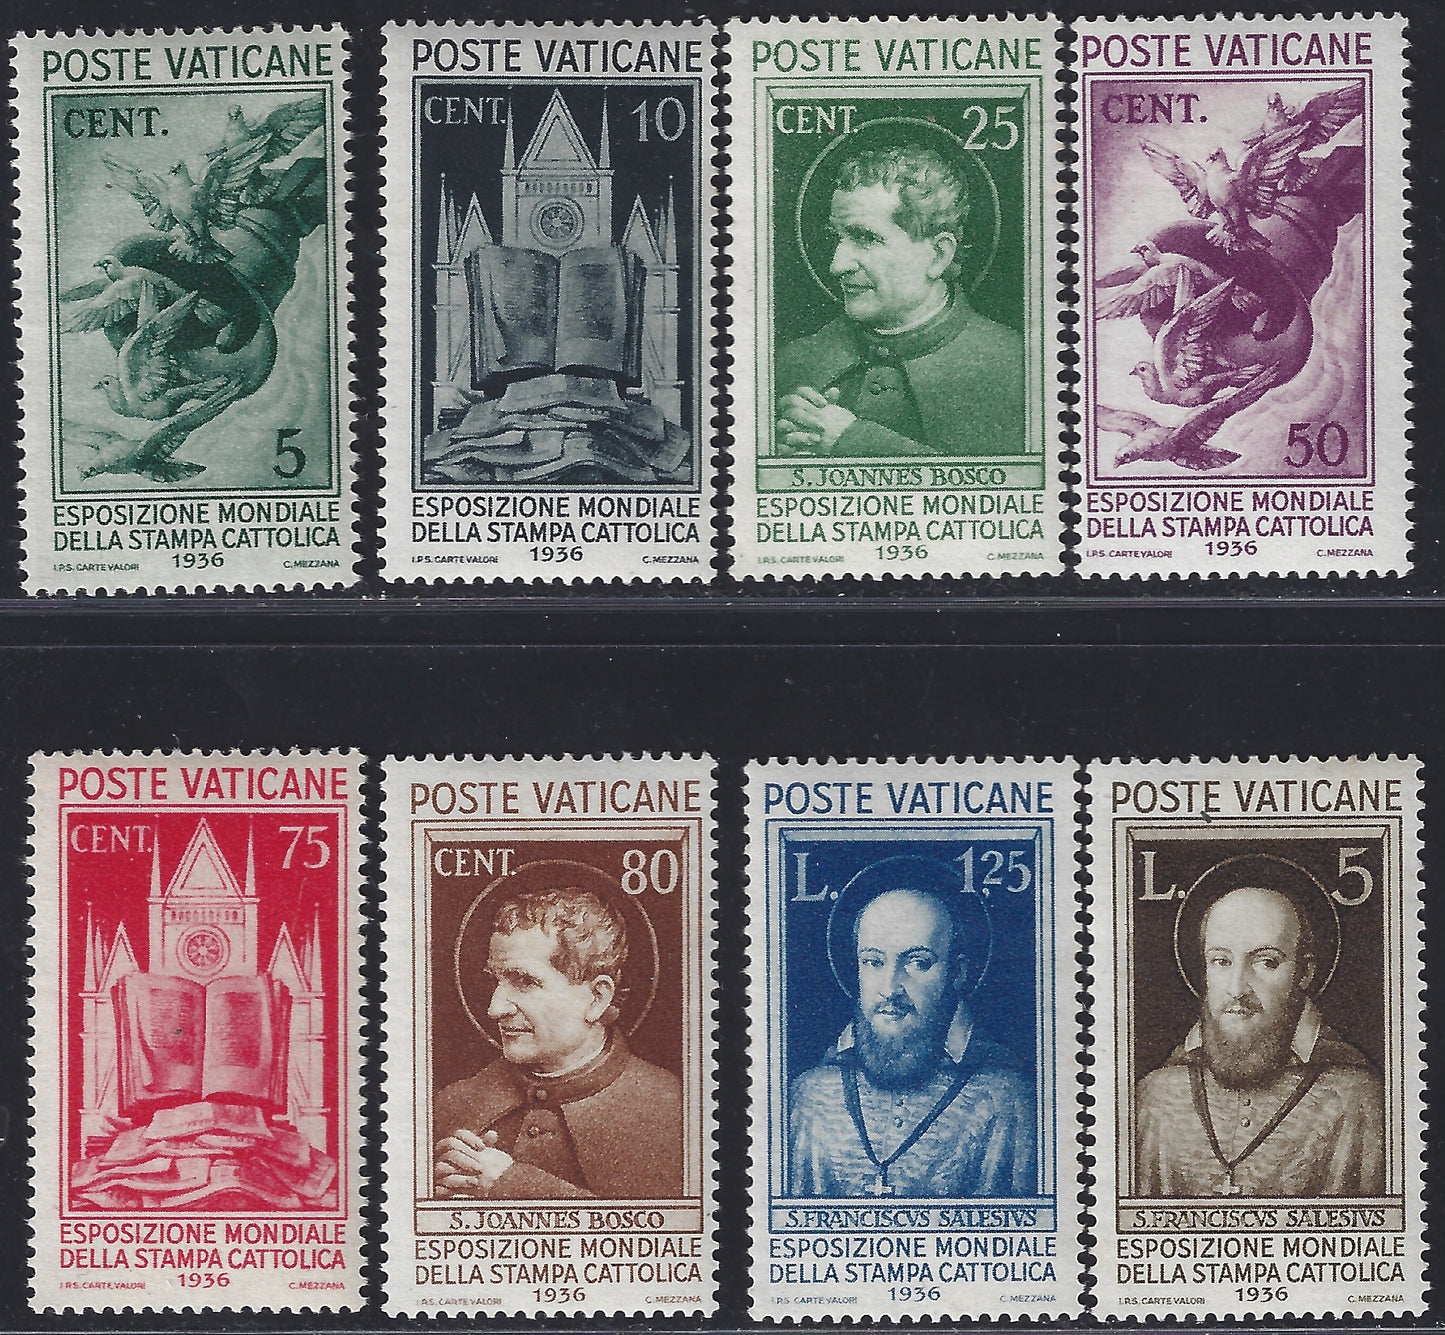 Vat15 - 1936 - World Exhibition of Catholic Press, set of eight new stamps with intact gum (47/54)